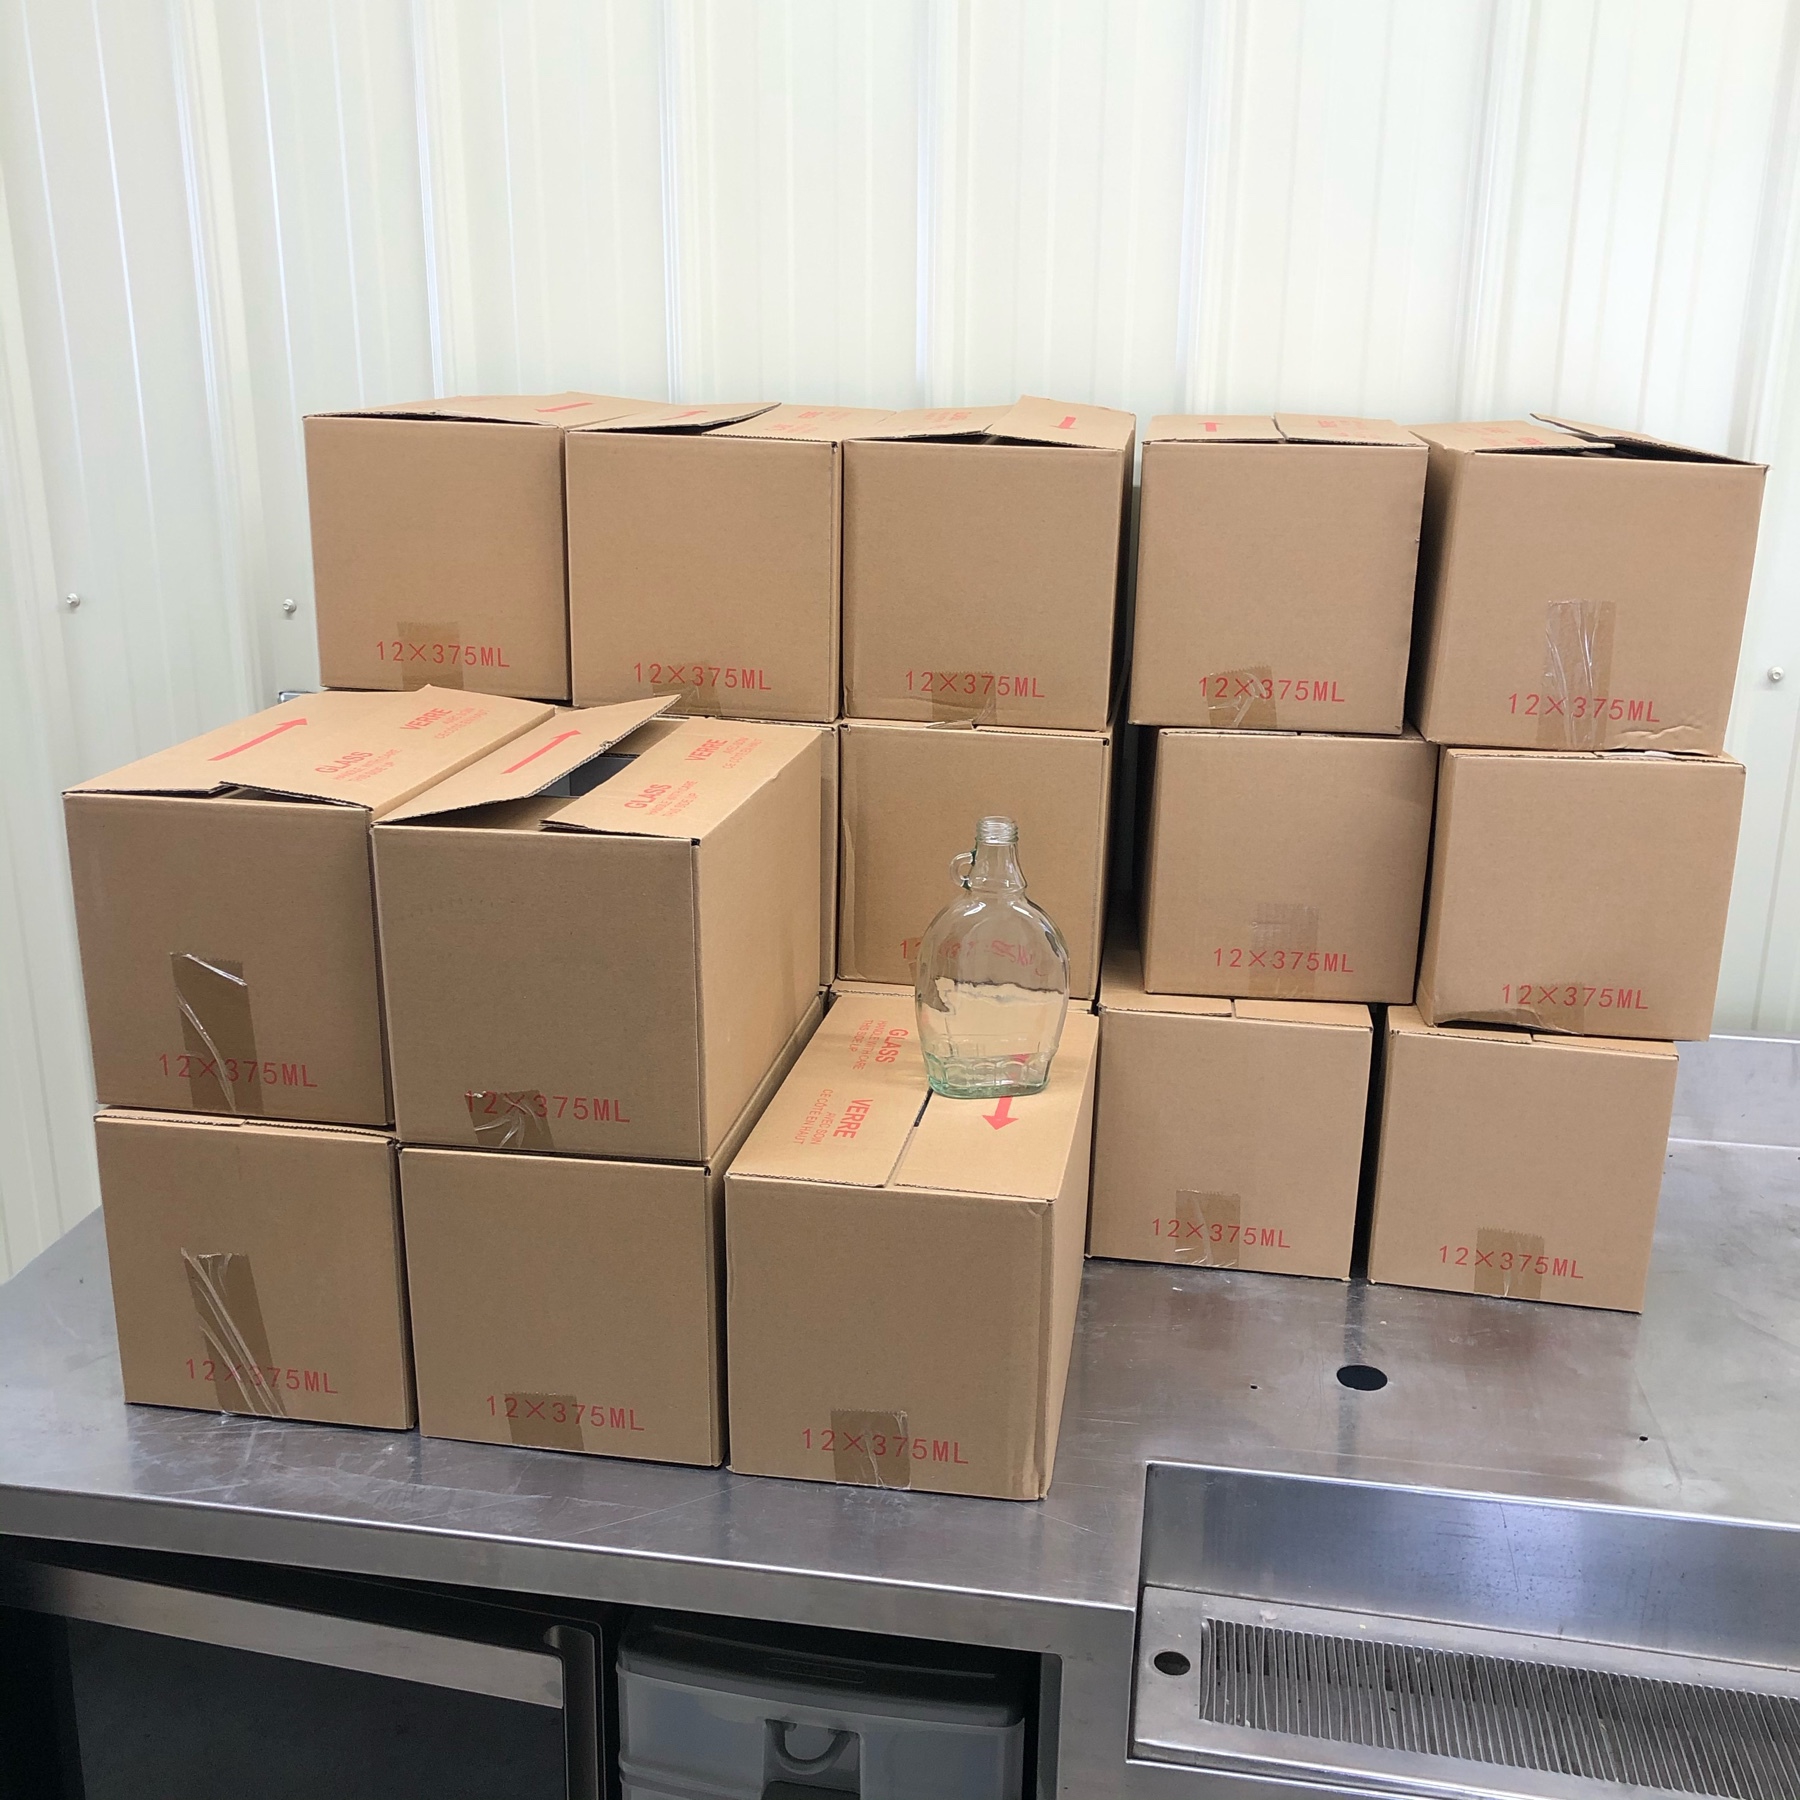 20 plain, cardboard boxes piled on a stainless steel counter. there is one bottle on display. 